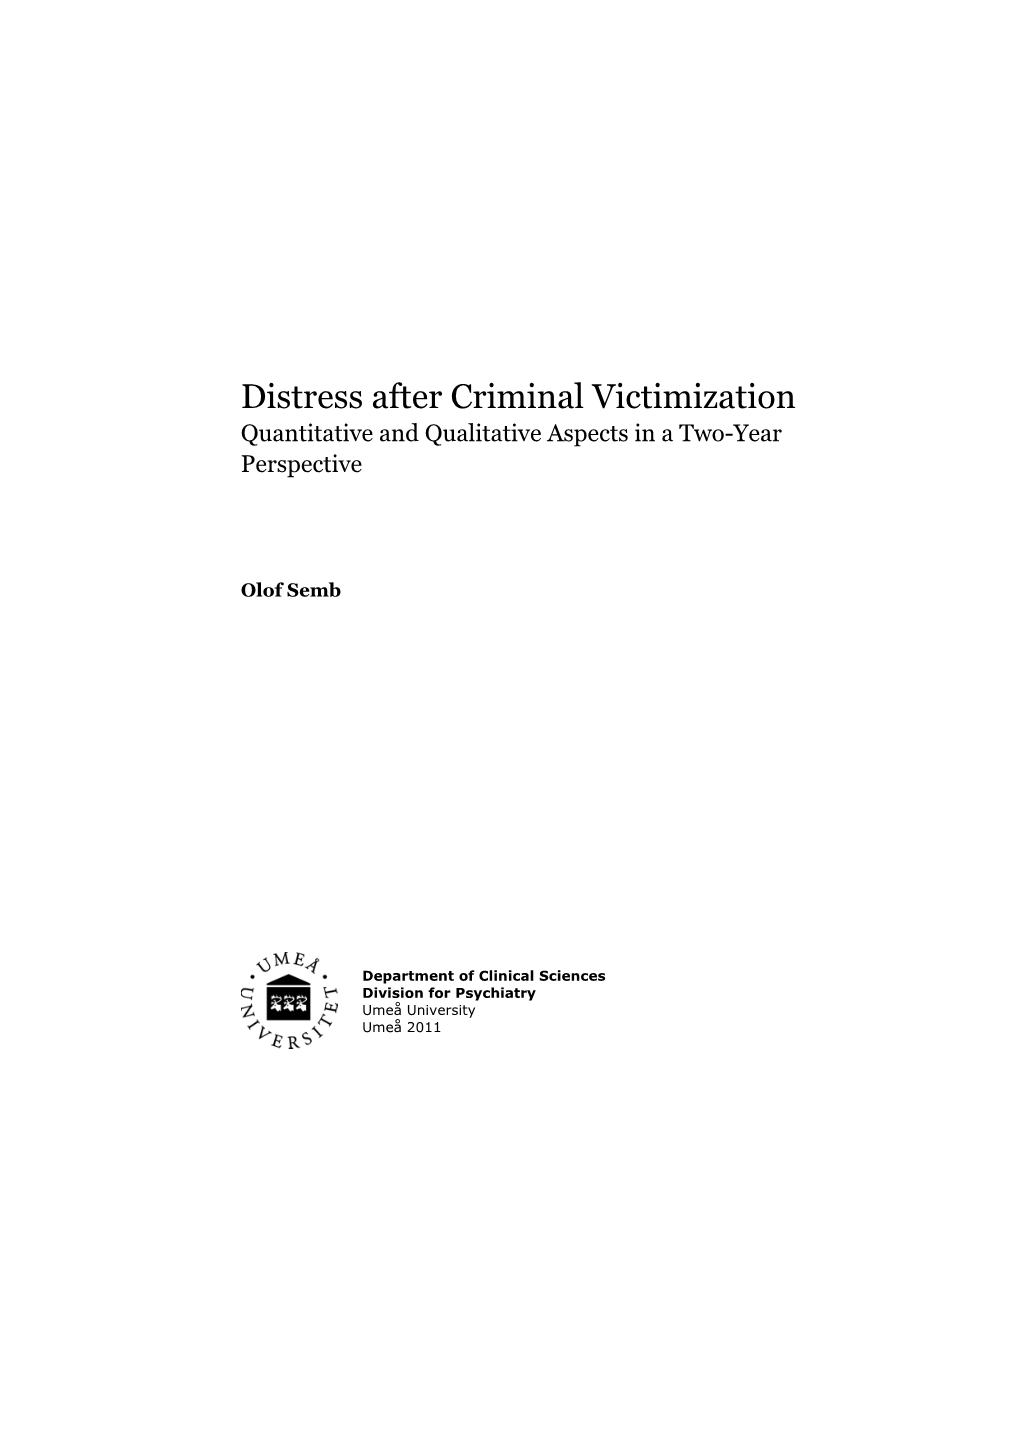 Distress After Criminal Victimization Quantitative and Qualitative Aspects in a Two-Year Perspective